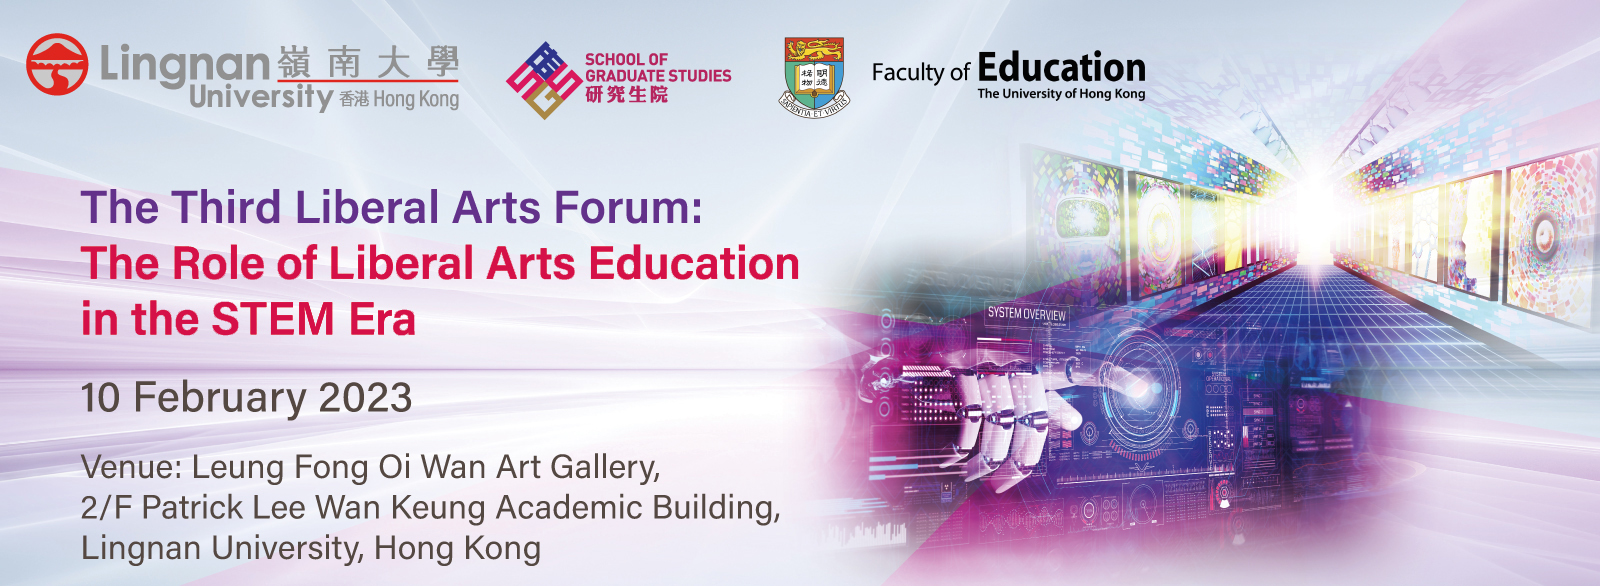 The Third Liberal Arts Forum: The Role of Liberal Arts Education in the STEM Era